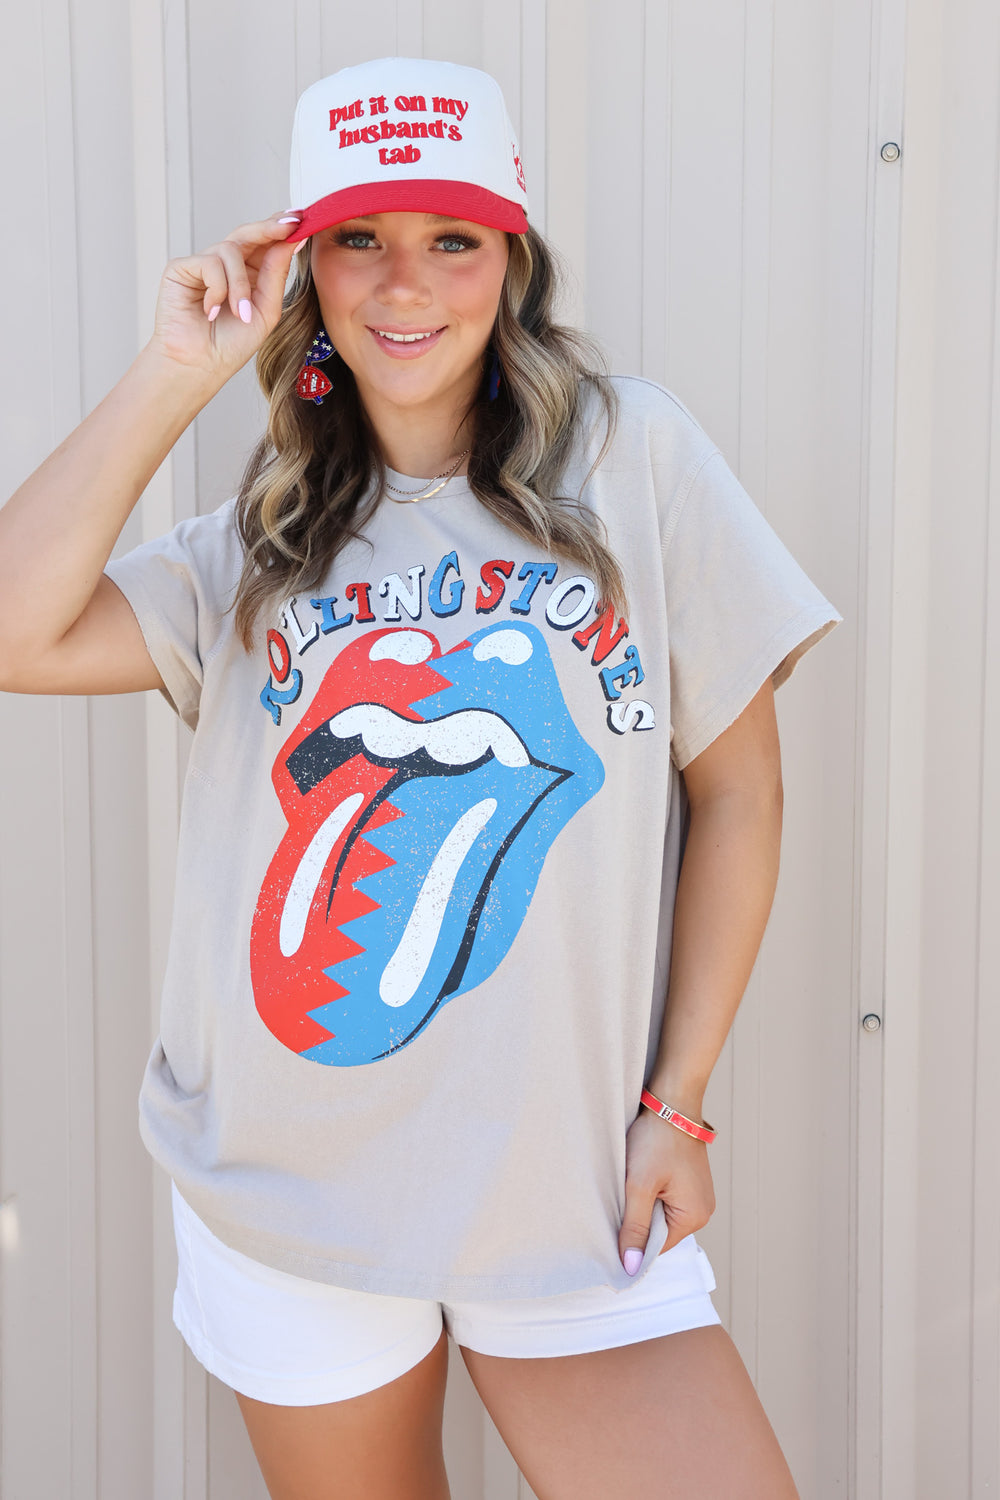 America Rolling Stones Tee - ShopSpoiled